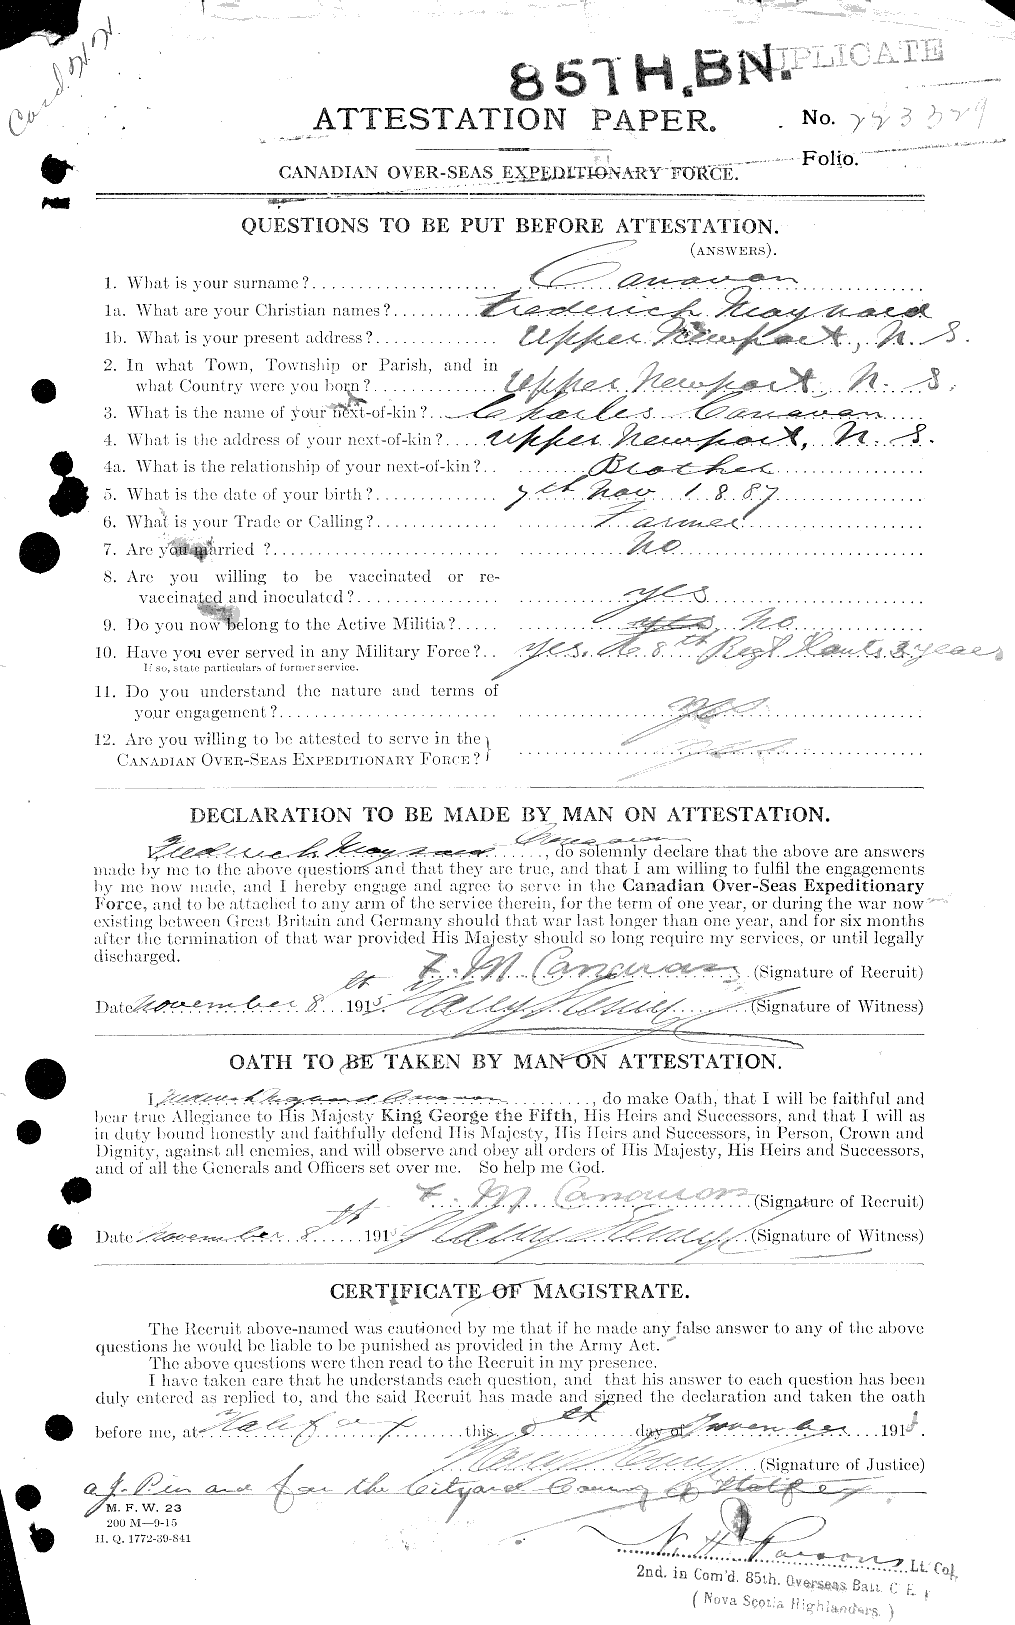 Personnel Records of the First World War - CEF 008853a